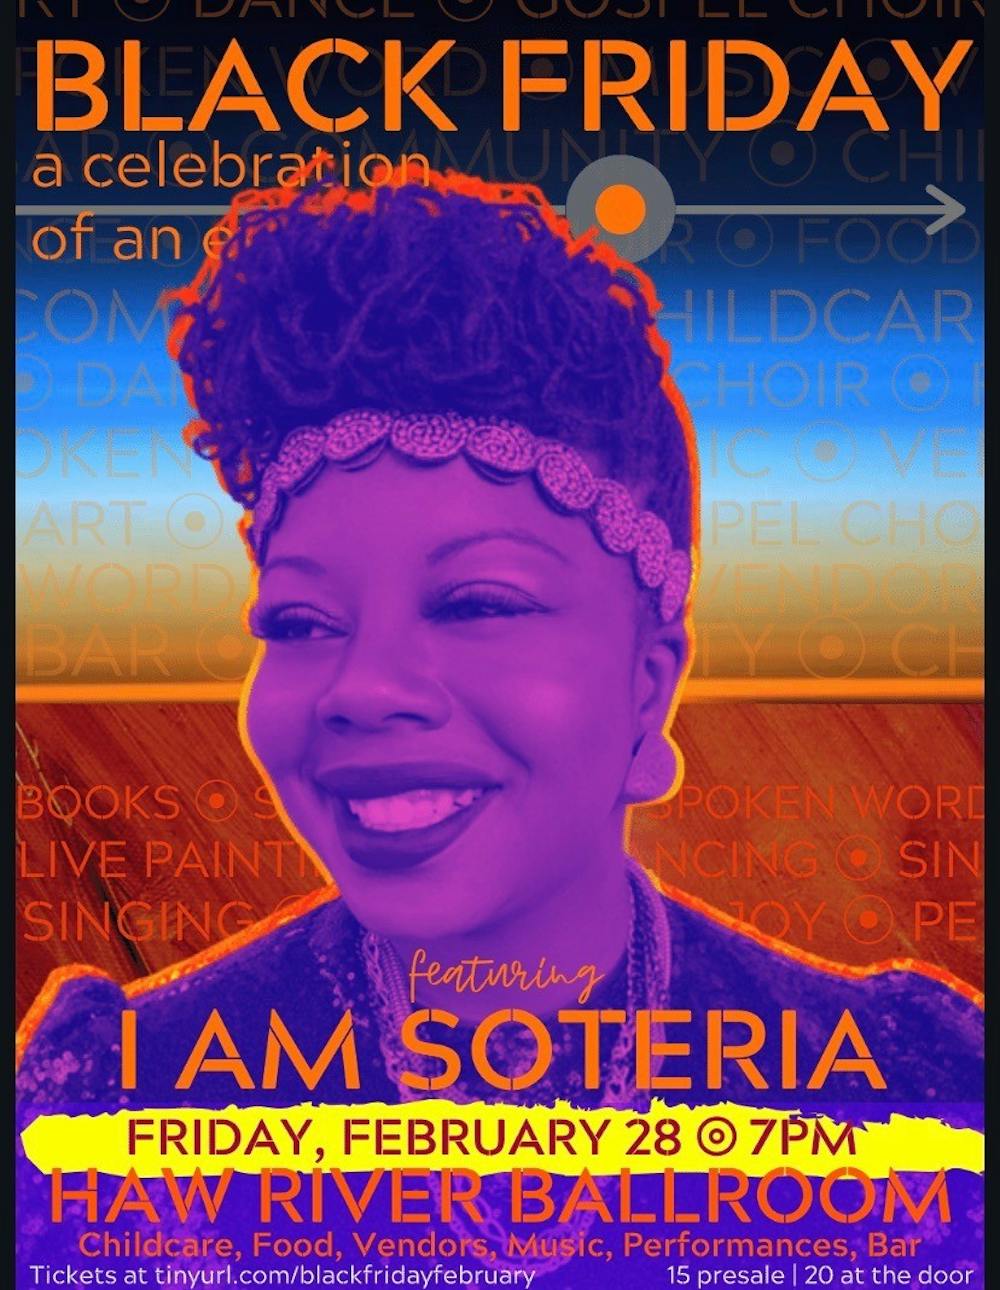 <p>Soteria Shepperson organized the event ‘Black Friday' as part of her performance platform “I Am Soteria”. Shepperson focuses on social issues like racism and equality at her events. Photo courtesy of Soteria Shepperson.</p>